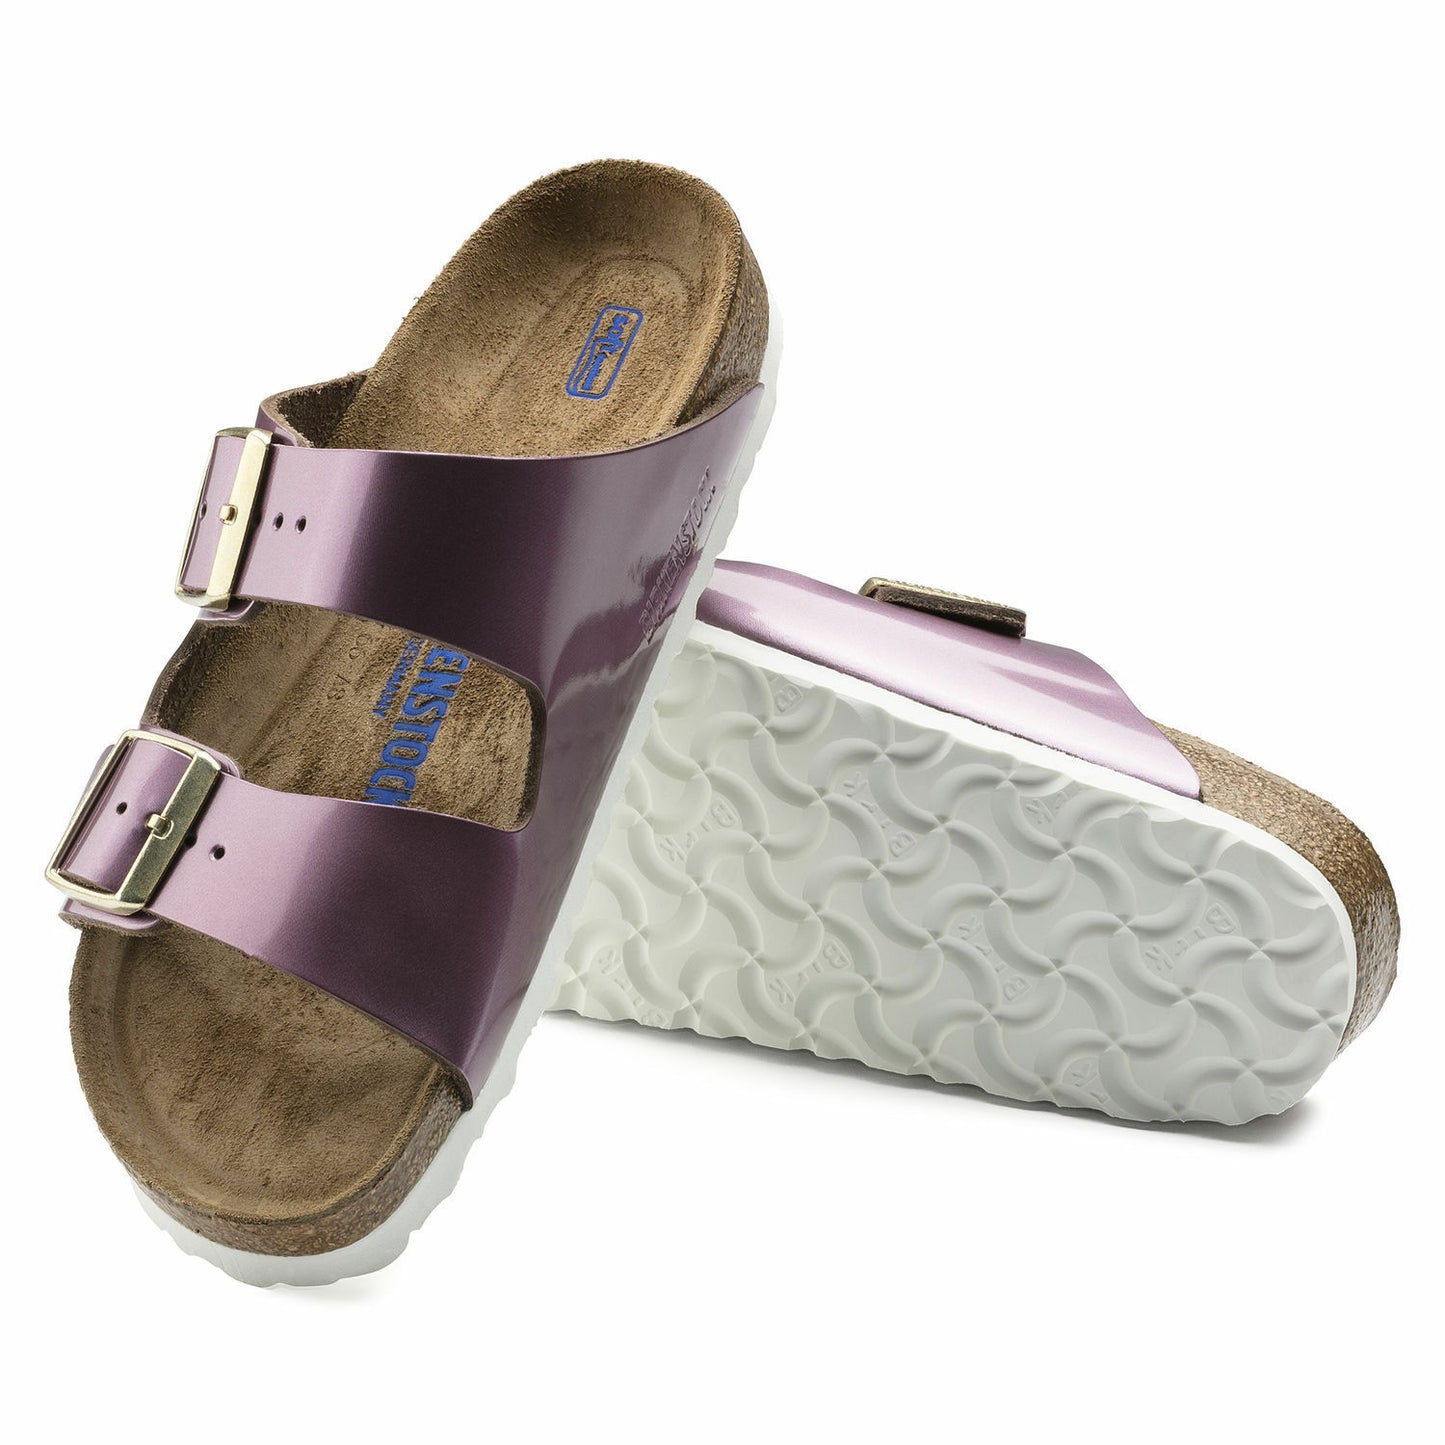 Birkenstock Arizona SoftFootbed Spectacular Pink Womens - All Mixed Up 